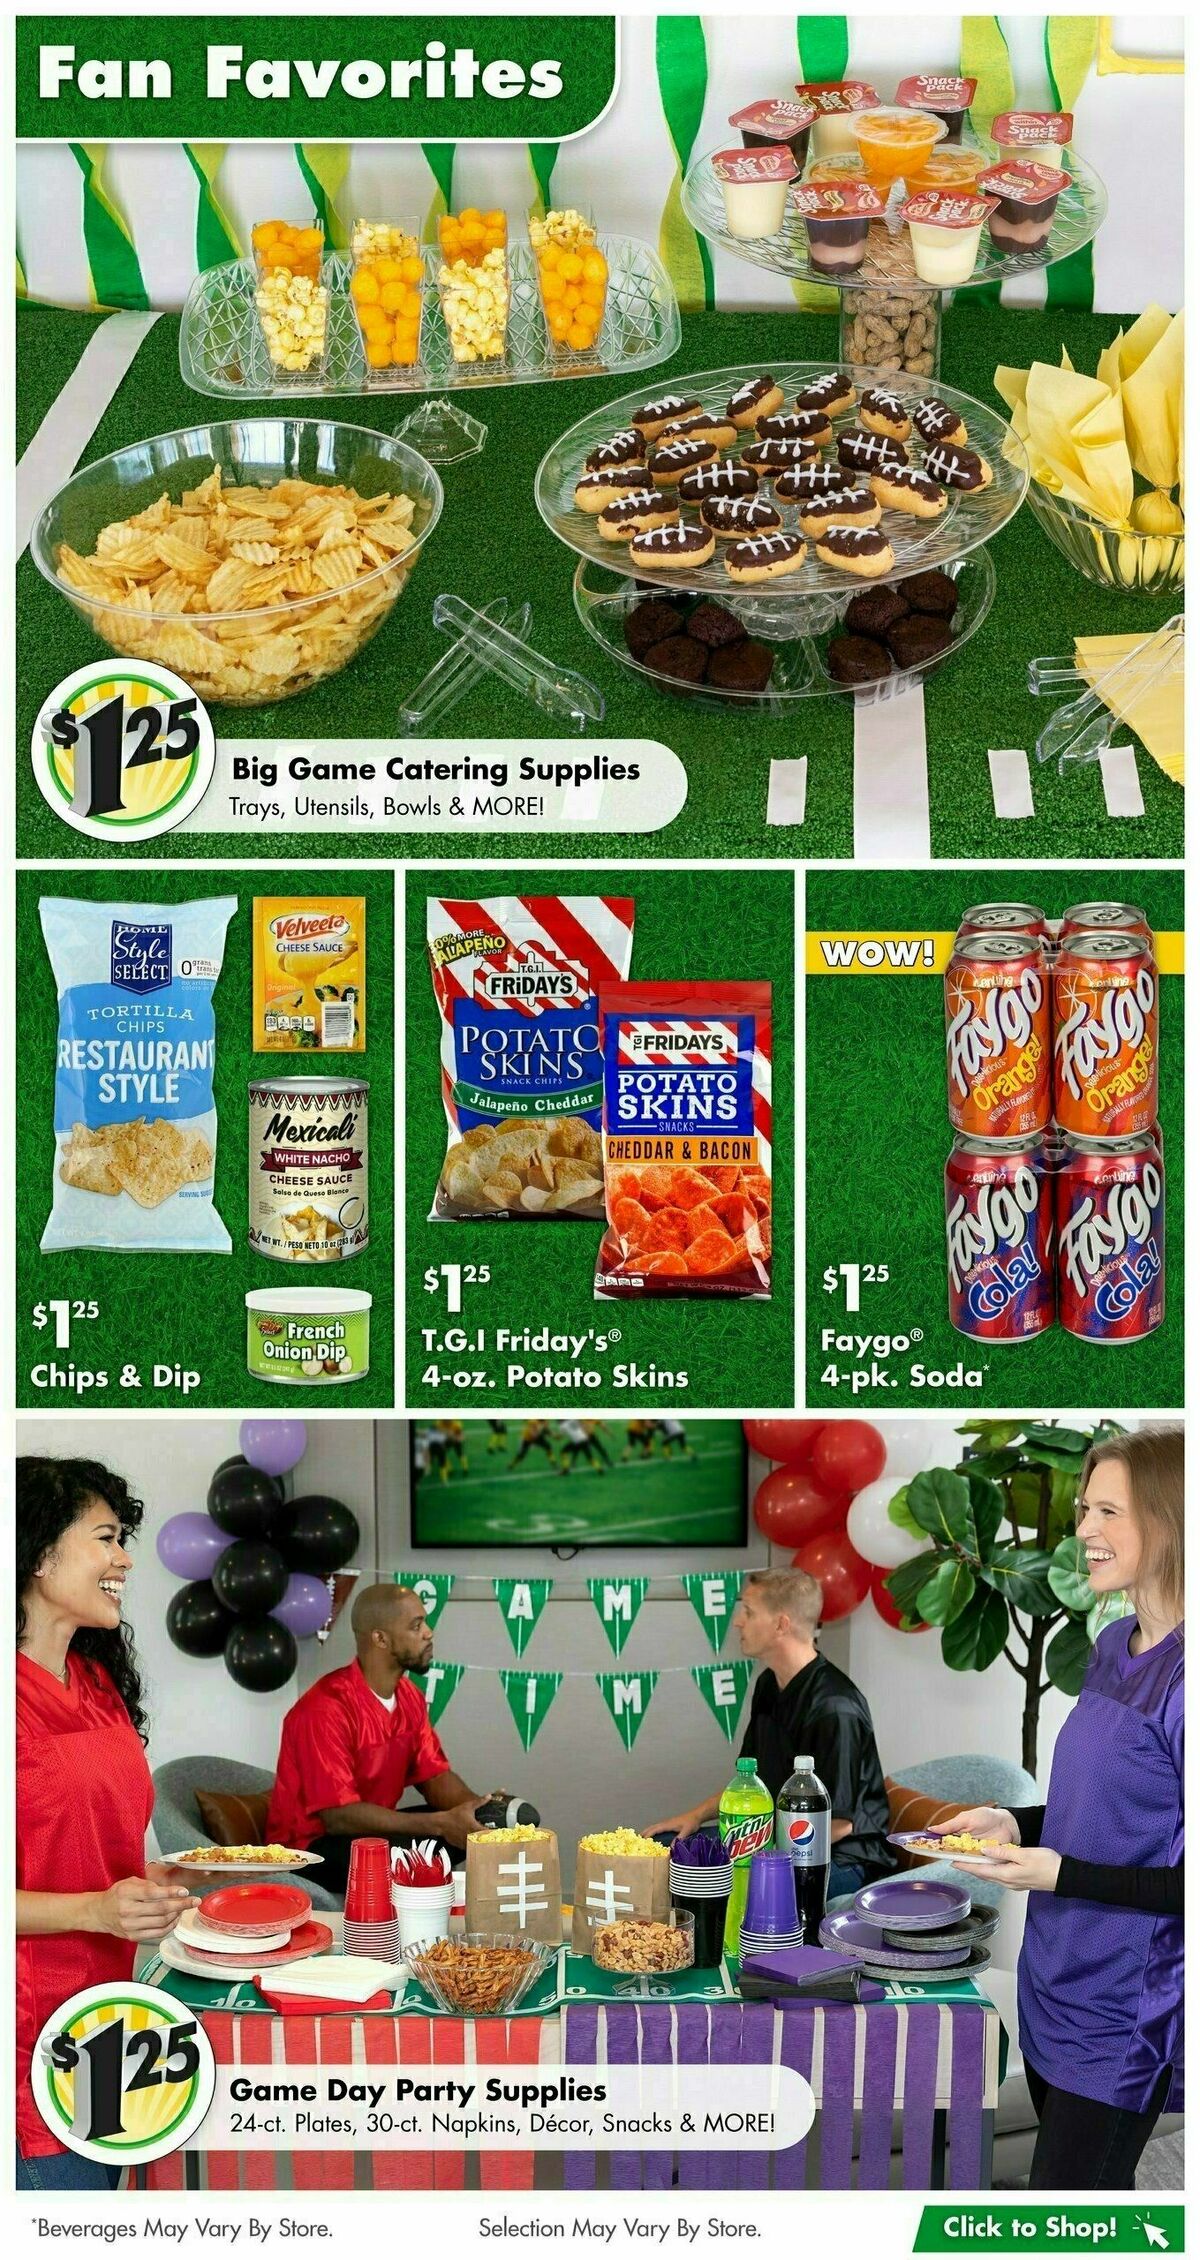 Dollar Tree Valentine's Day Weekly Ad from January 28